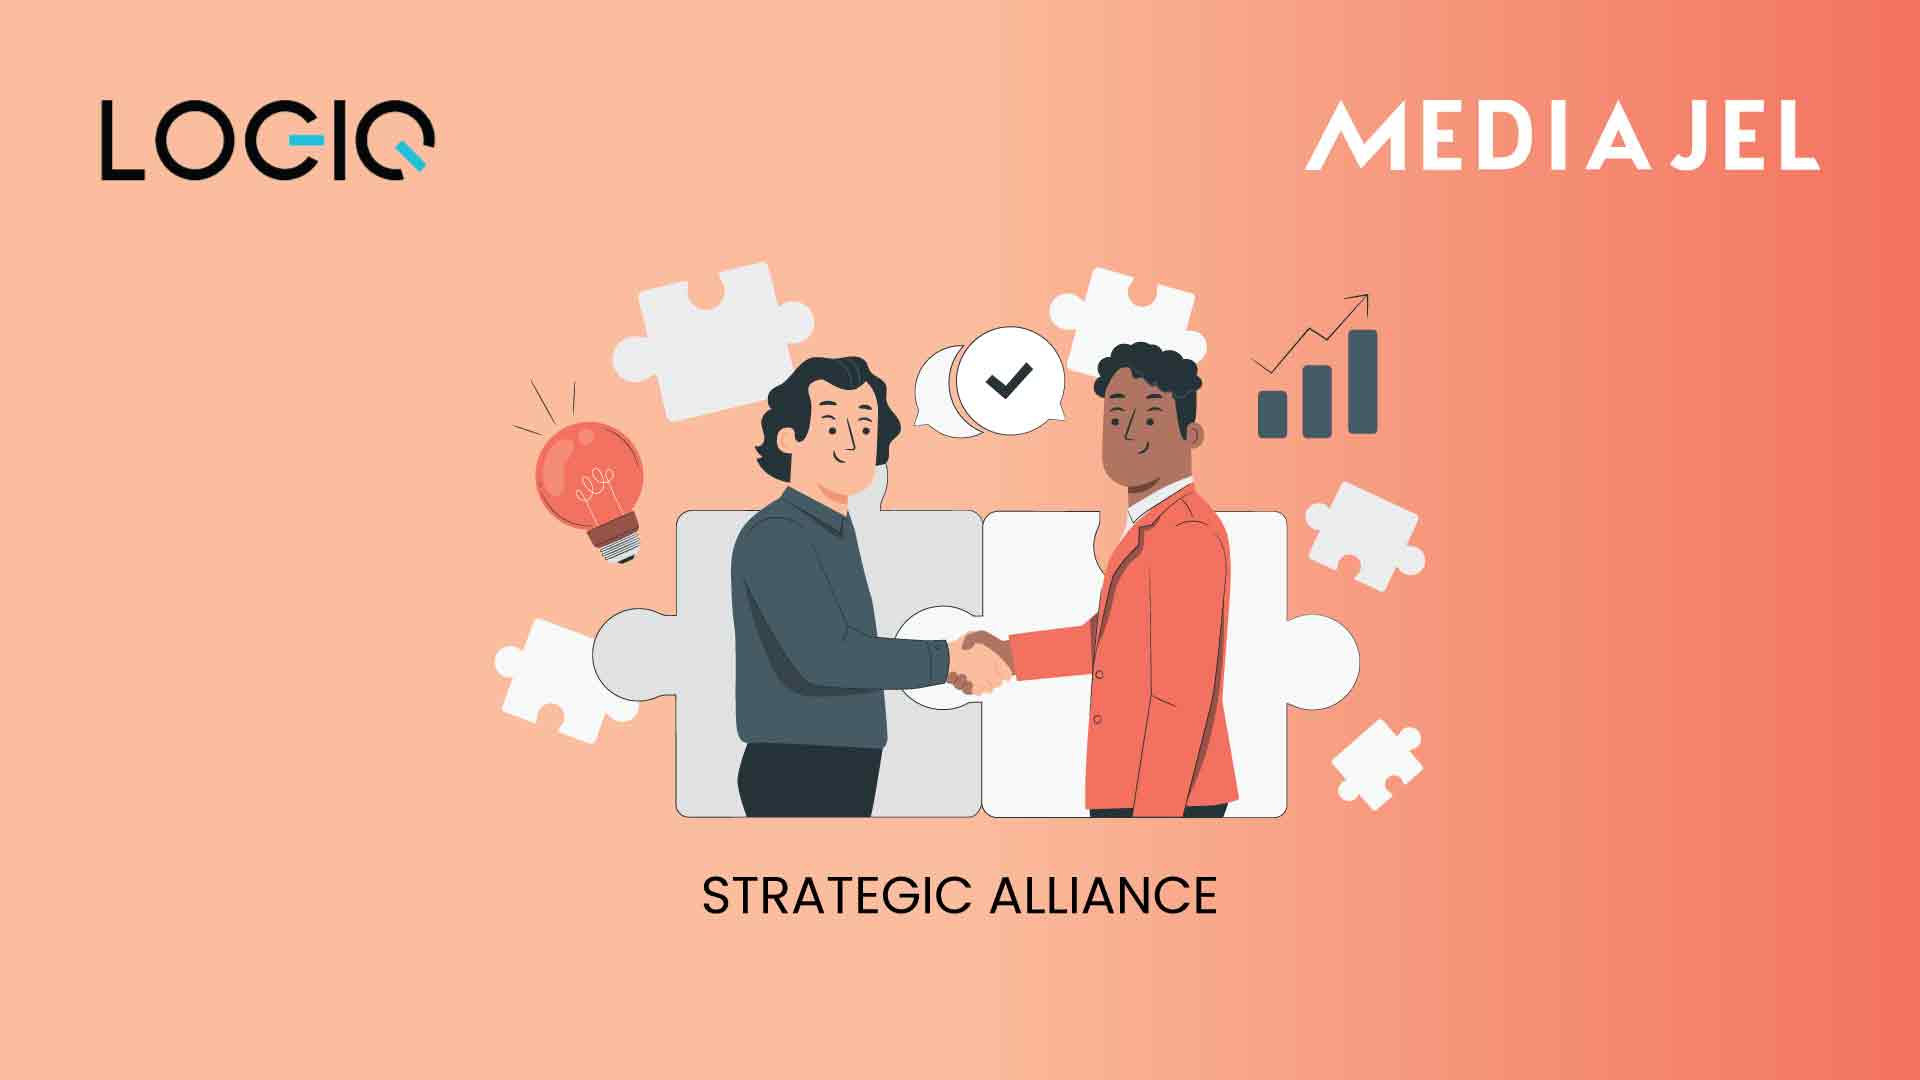 Logiq and MediaJel Align to Provide Powerful Marketing Tools and Enhance Consumer Targeting and Reach Companies Expect Stronger Competitive Advantages, Brand Equity and Enterprise Value